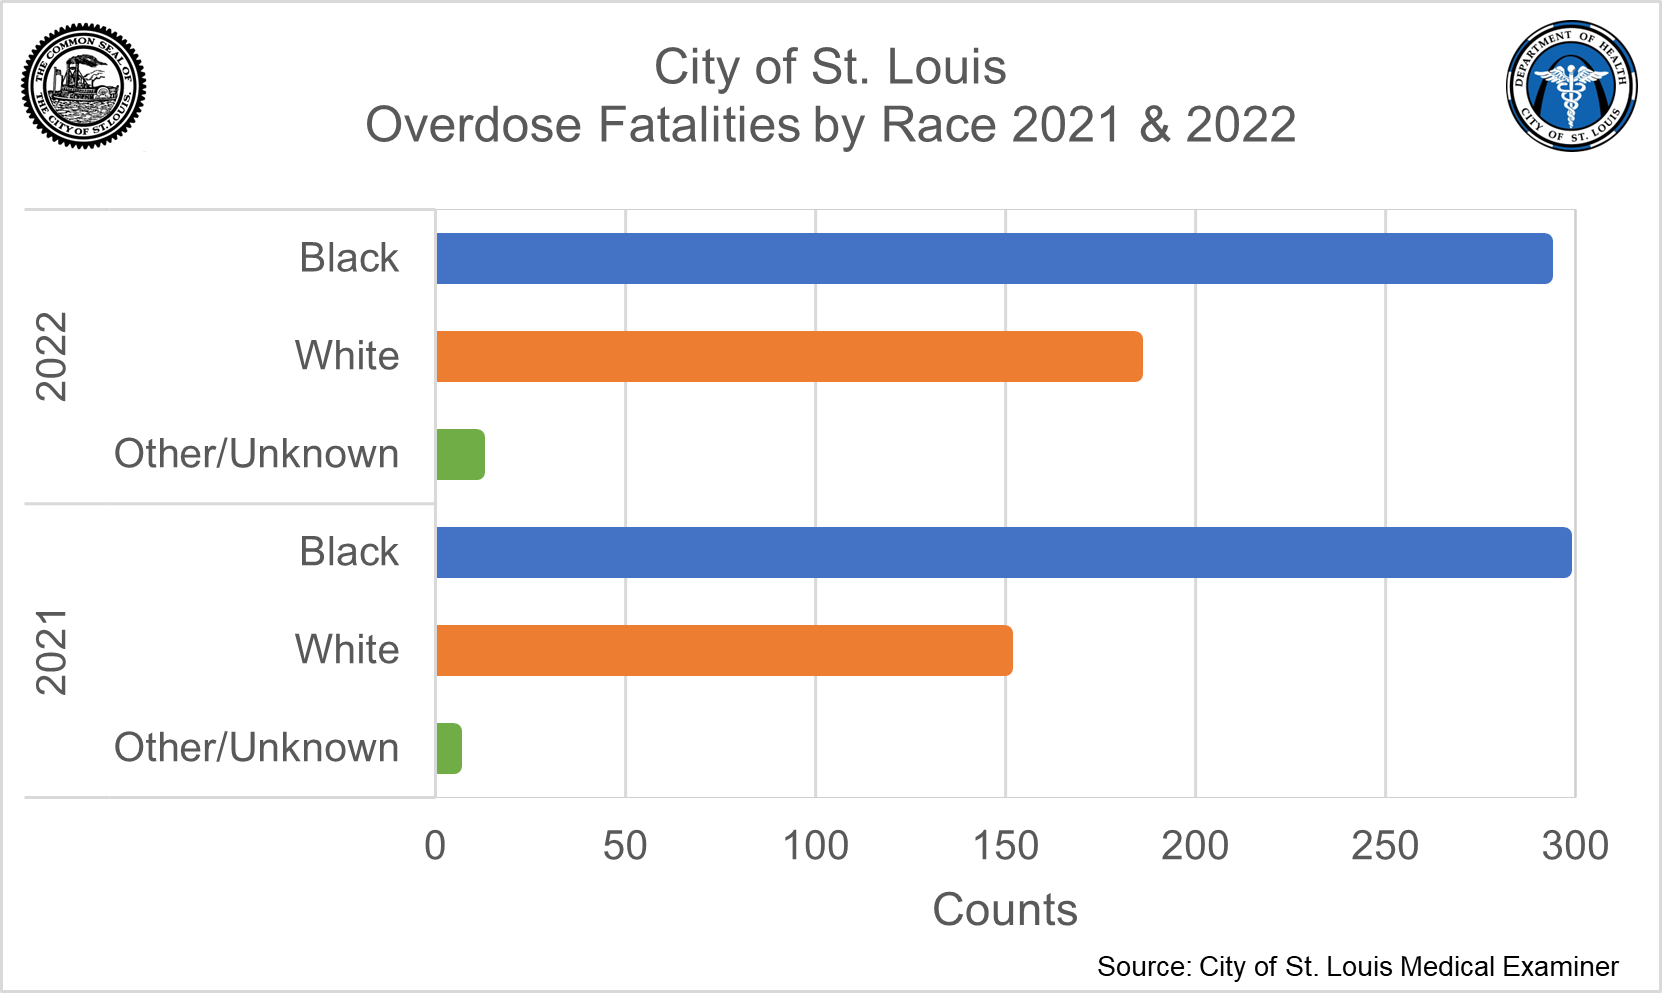 Alt text: A horizontal bar graph shows overdose fatalities by race in the City of St. Louis for the years 2021 and 2022. In both years, counts of Black fatalities were much higher than White or Other Race fatalities. This disparity decreased slightly in 2